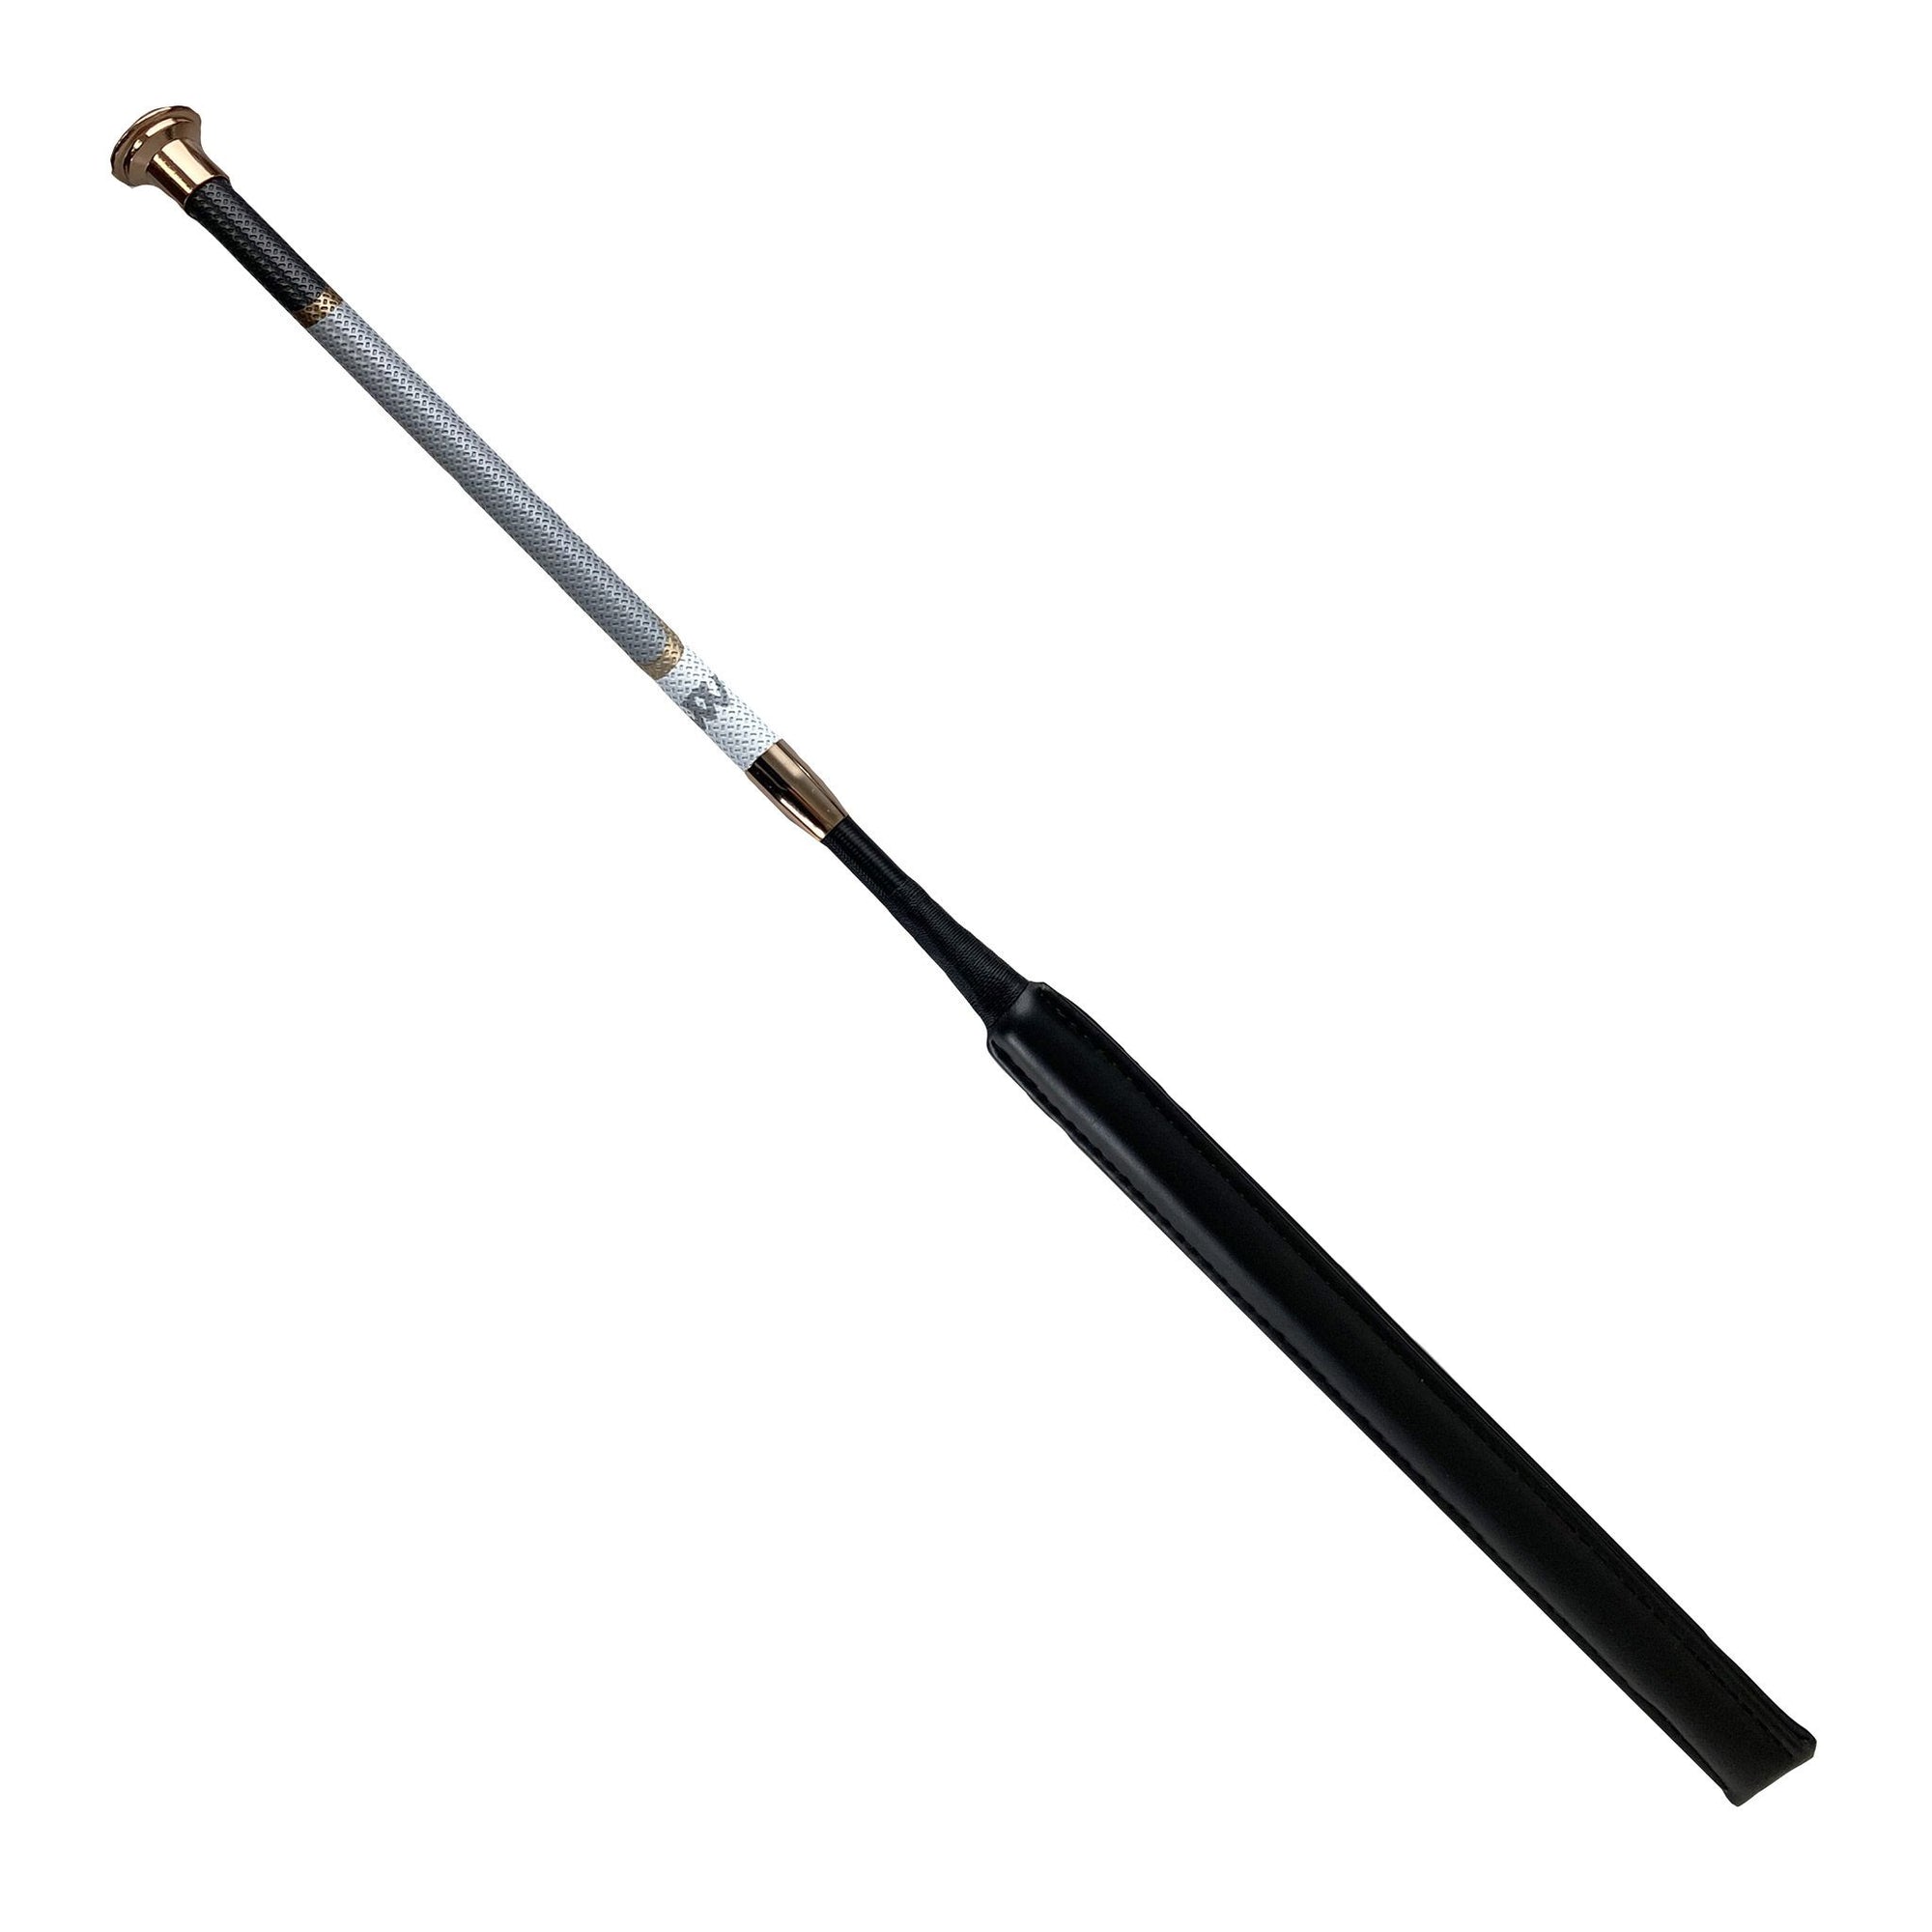 Soft grip handle, wide padded bat end with rose gold accents.